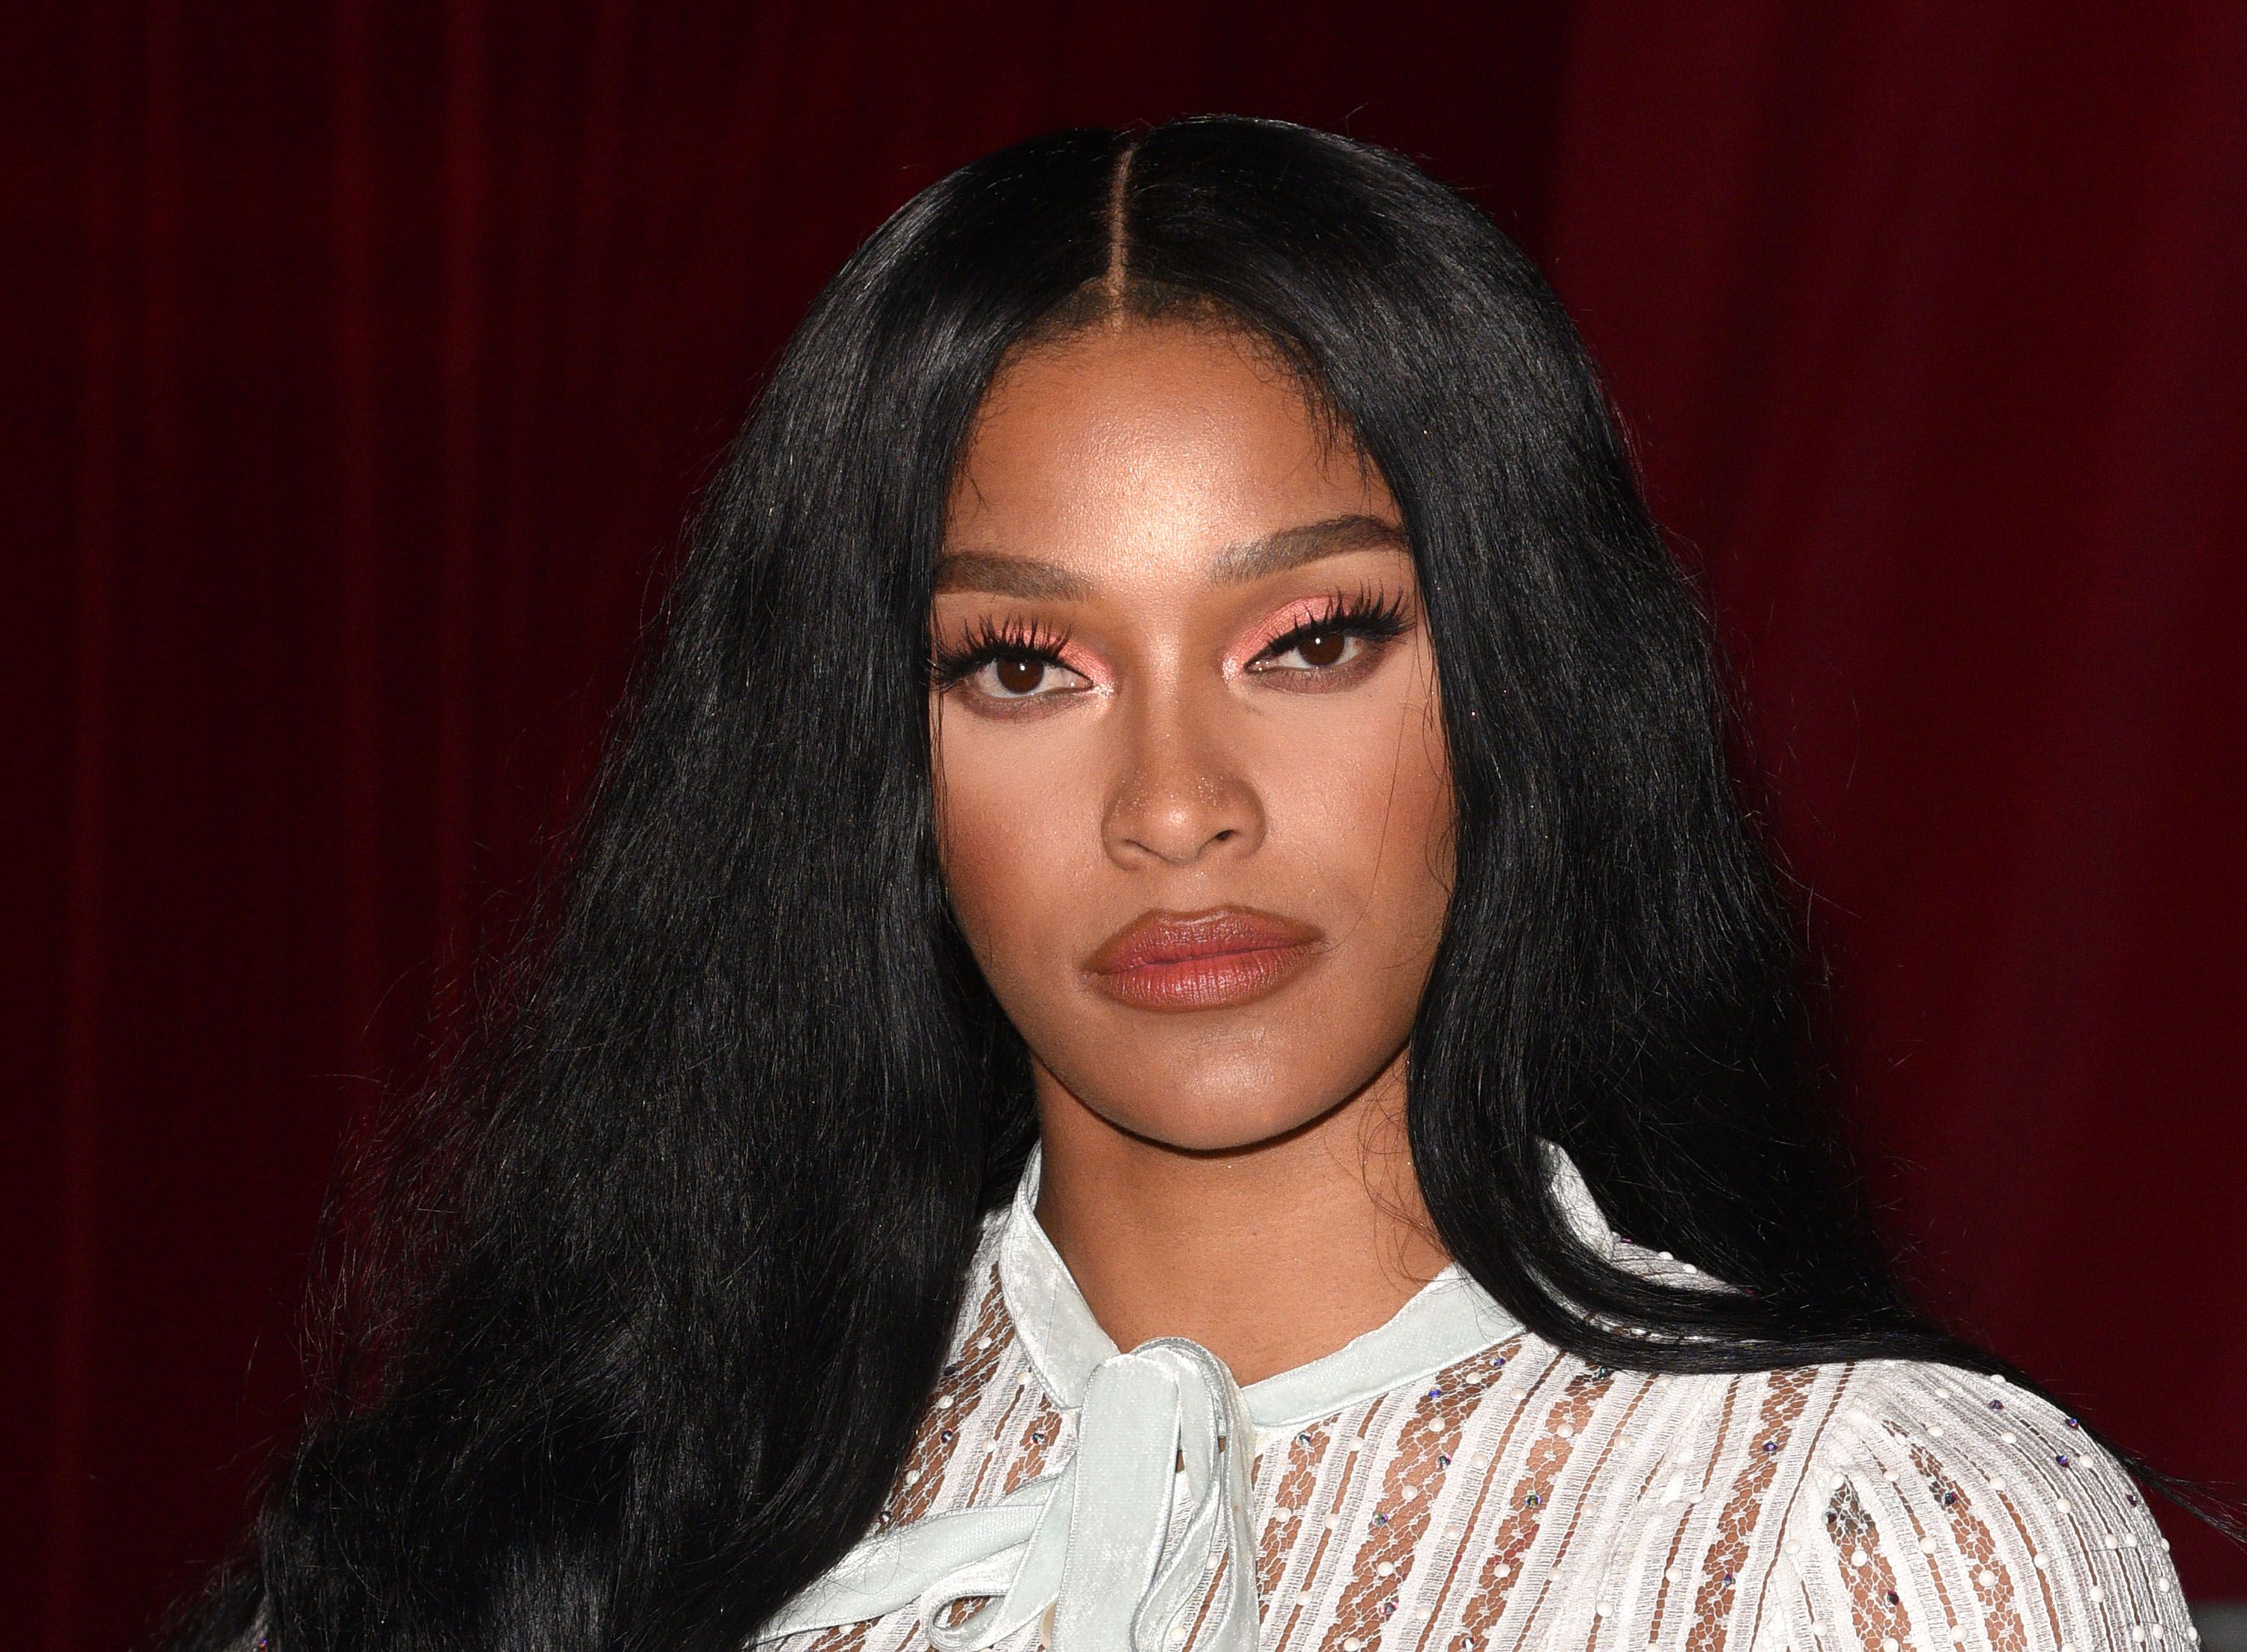 Joseline Hernandez attends the Maxims Hot 100 Event | Source: Getty Images/GlobalImagesUkraine